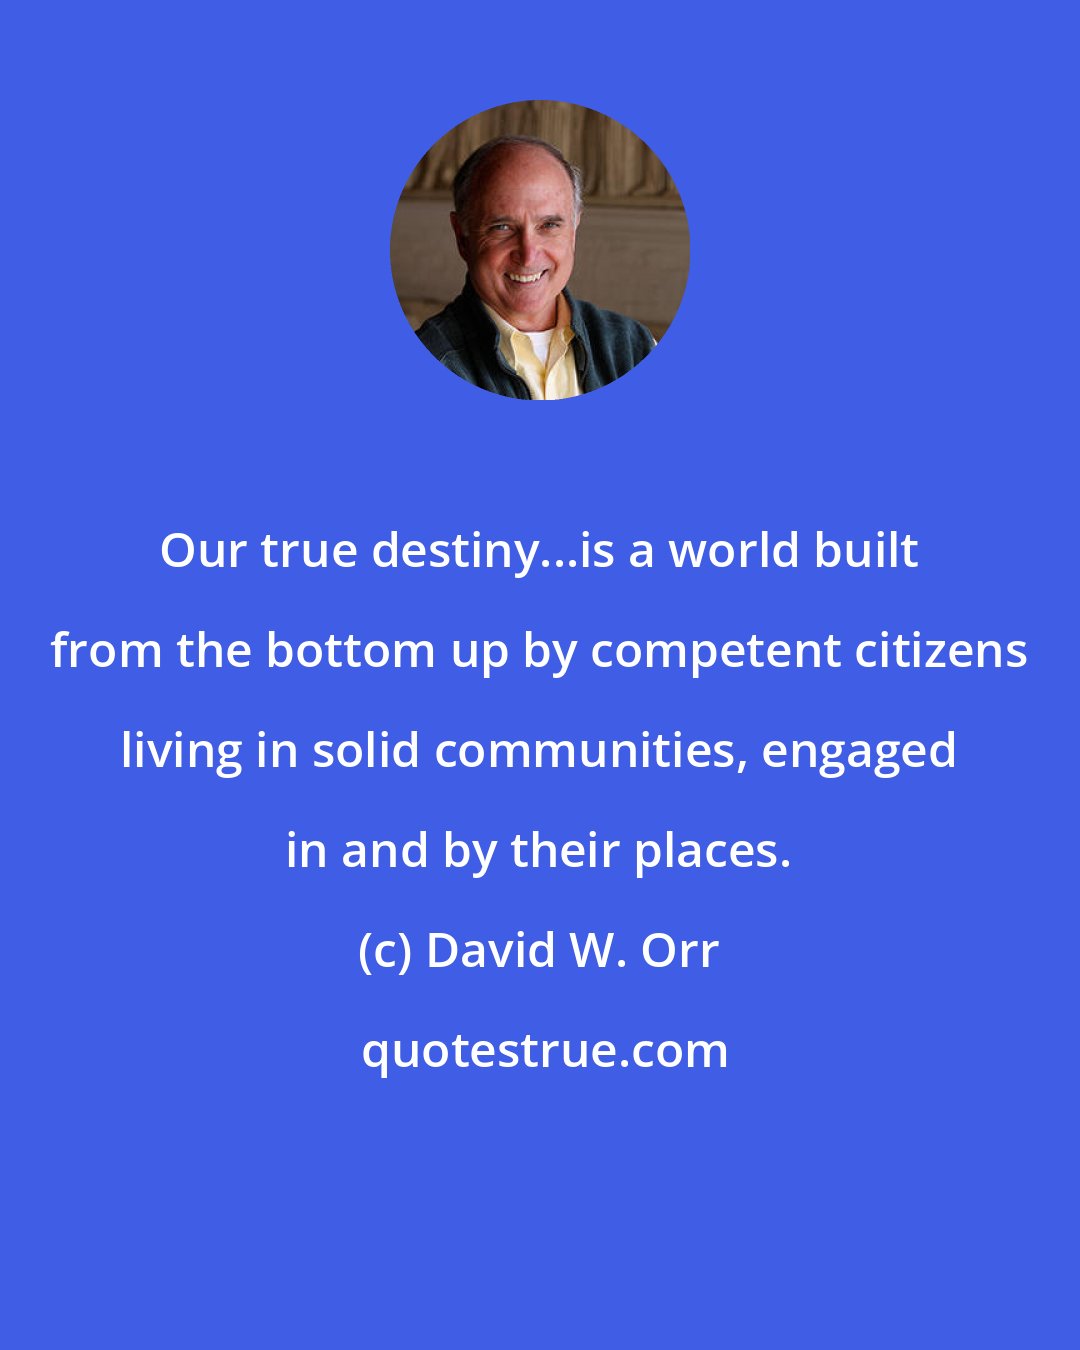 David W. Orr: Our true destiny...is a world built from the bottom up by competent citizens living in solid communities, engaged in and by their places.